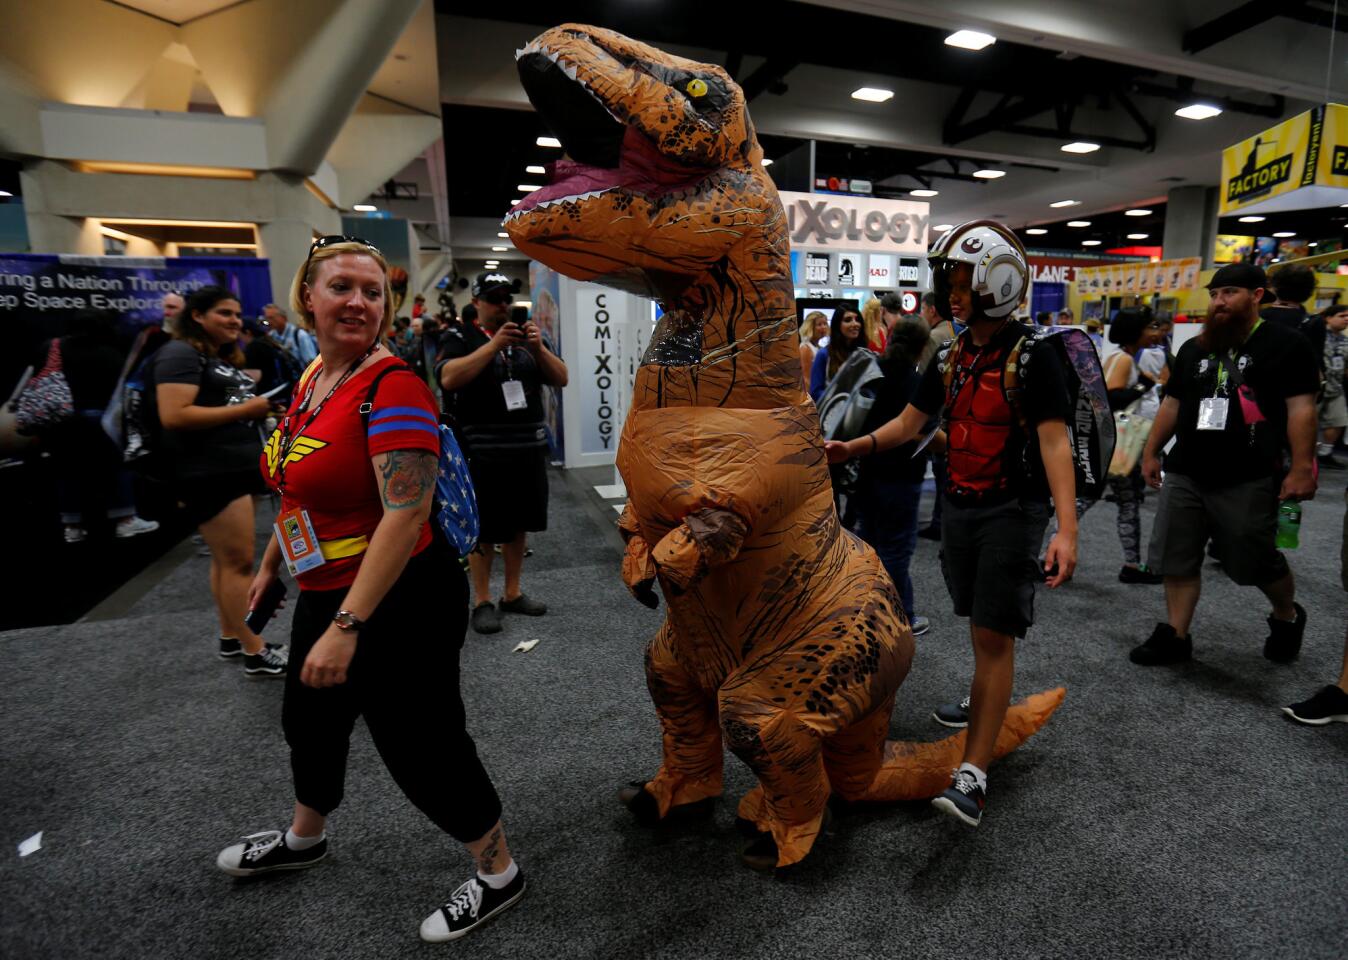 Fans of superhero movies, comic books and pop culture walk the convention floor in costume during the opening day of Comic-Con International in San Diego